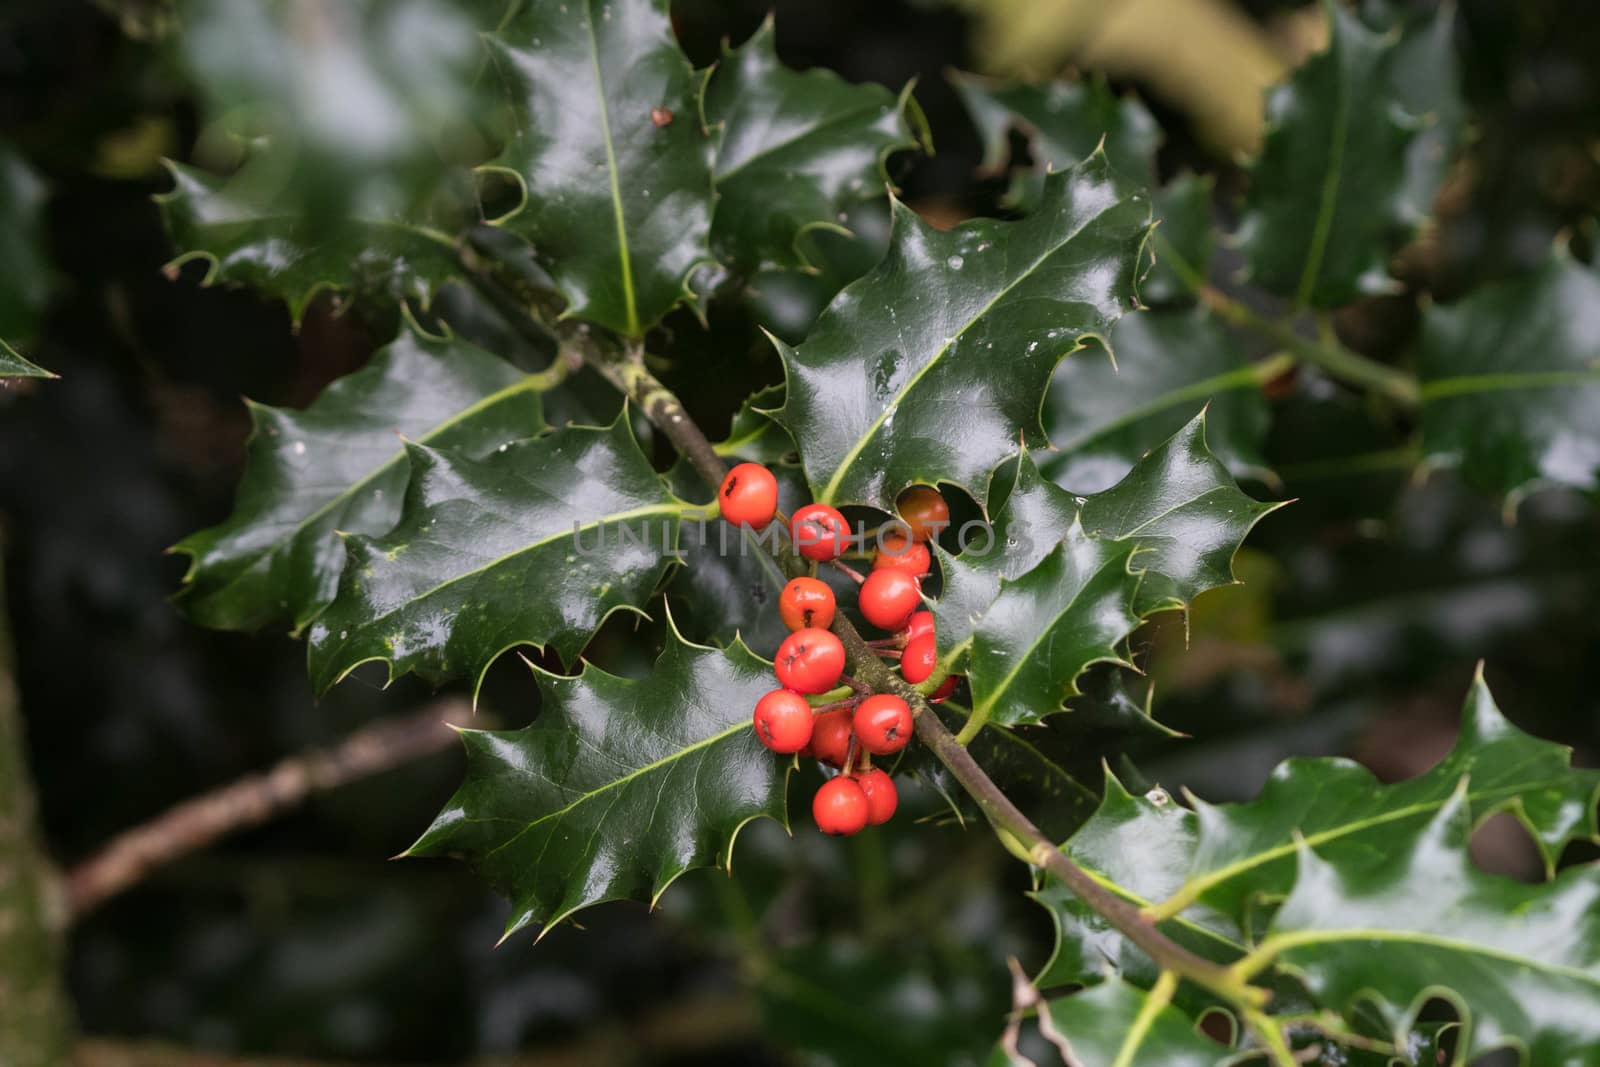 Holly bush with red berries by riverheron_photos